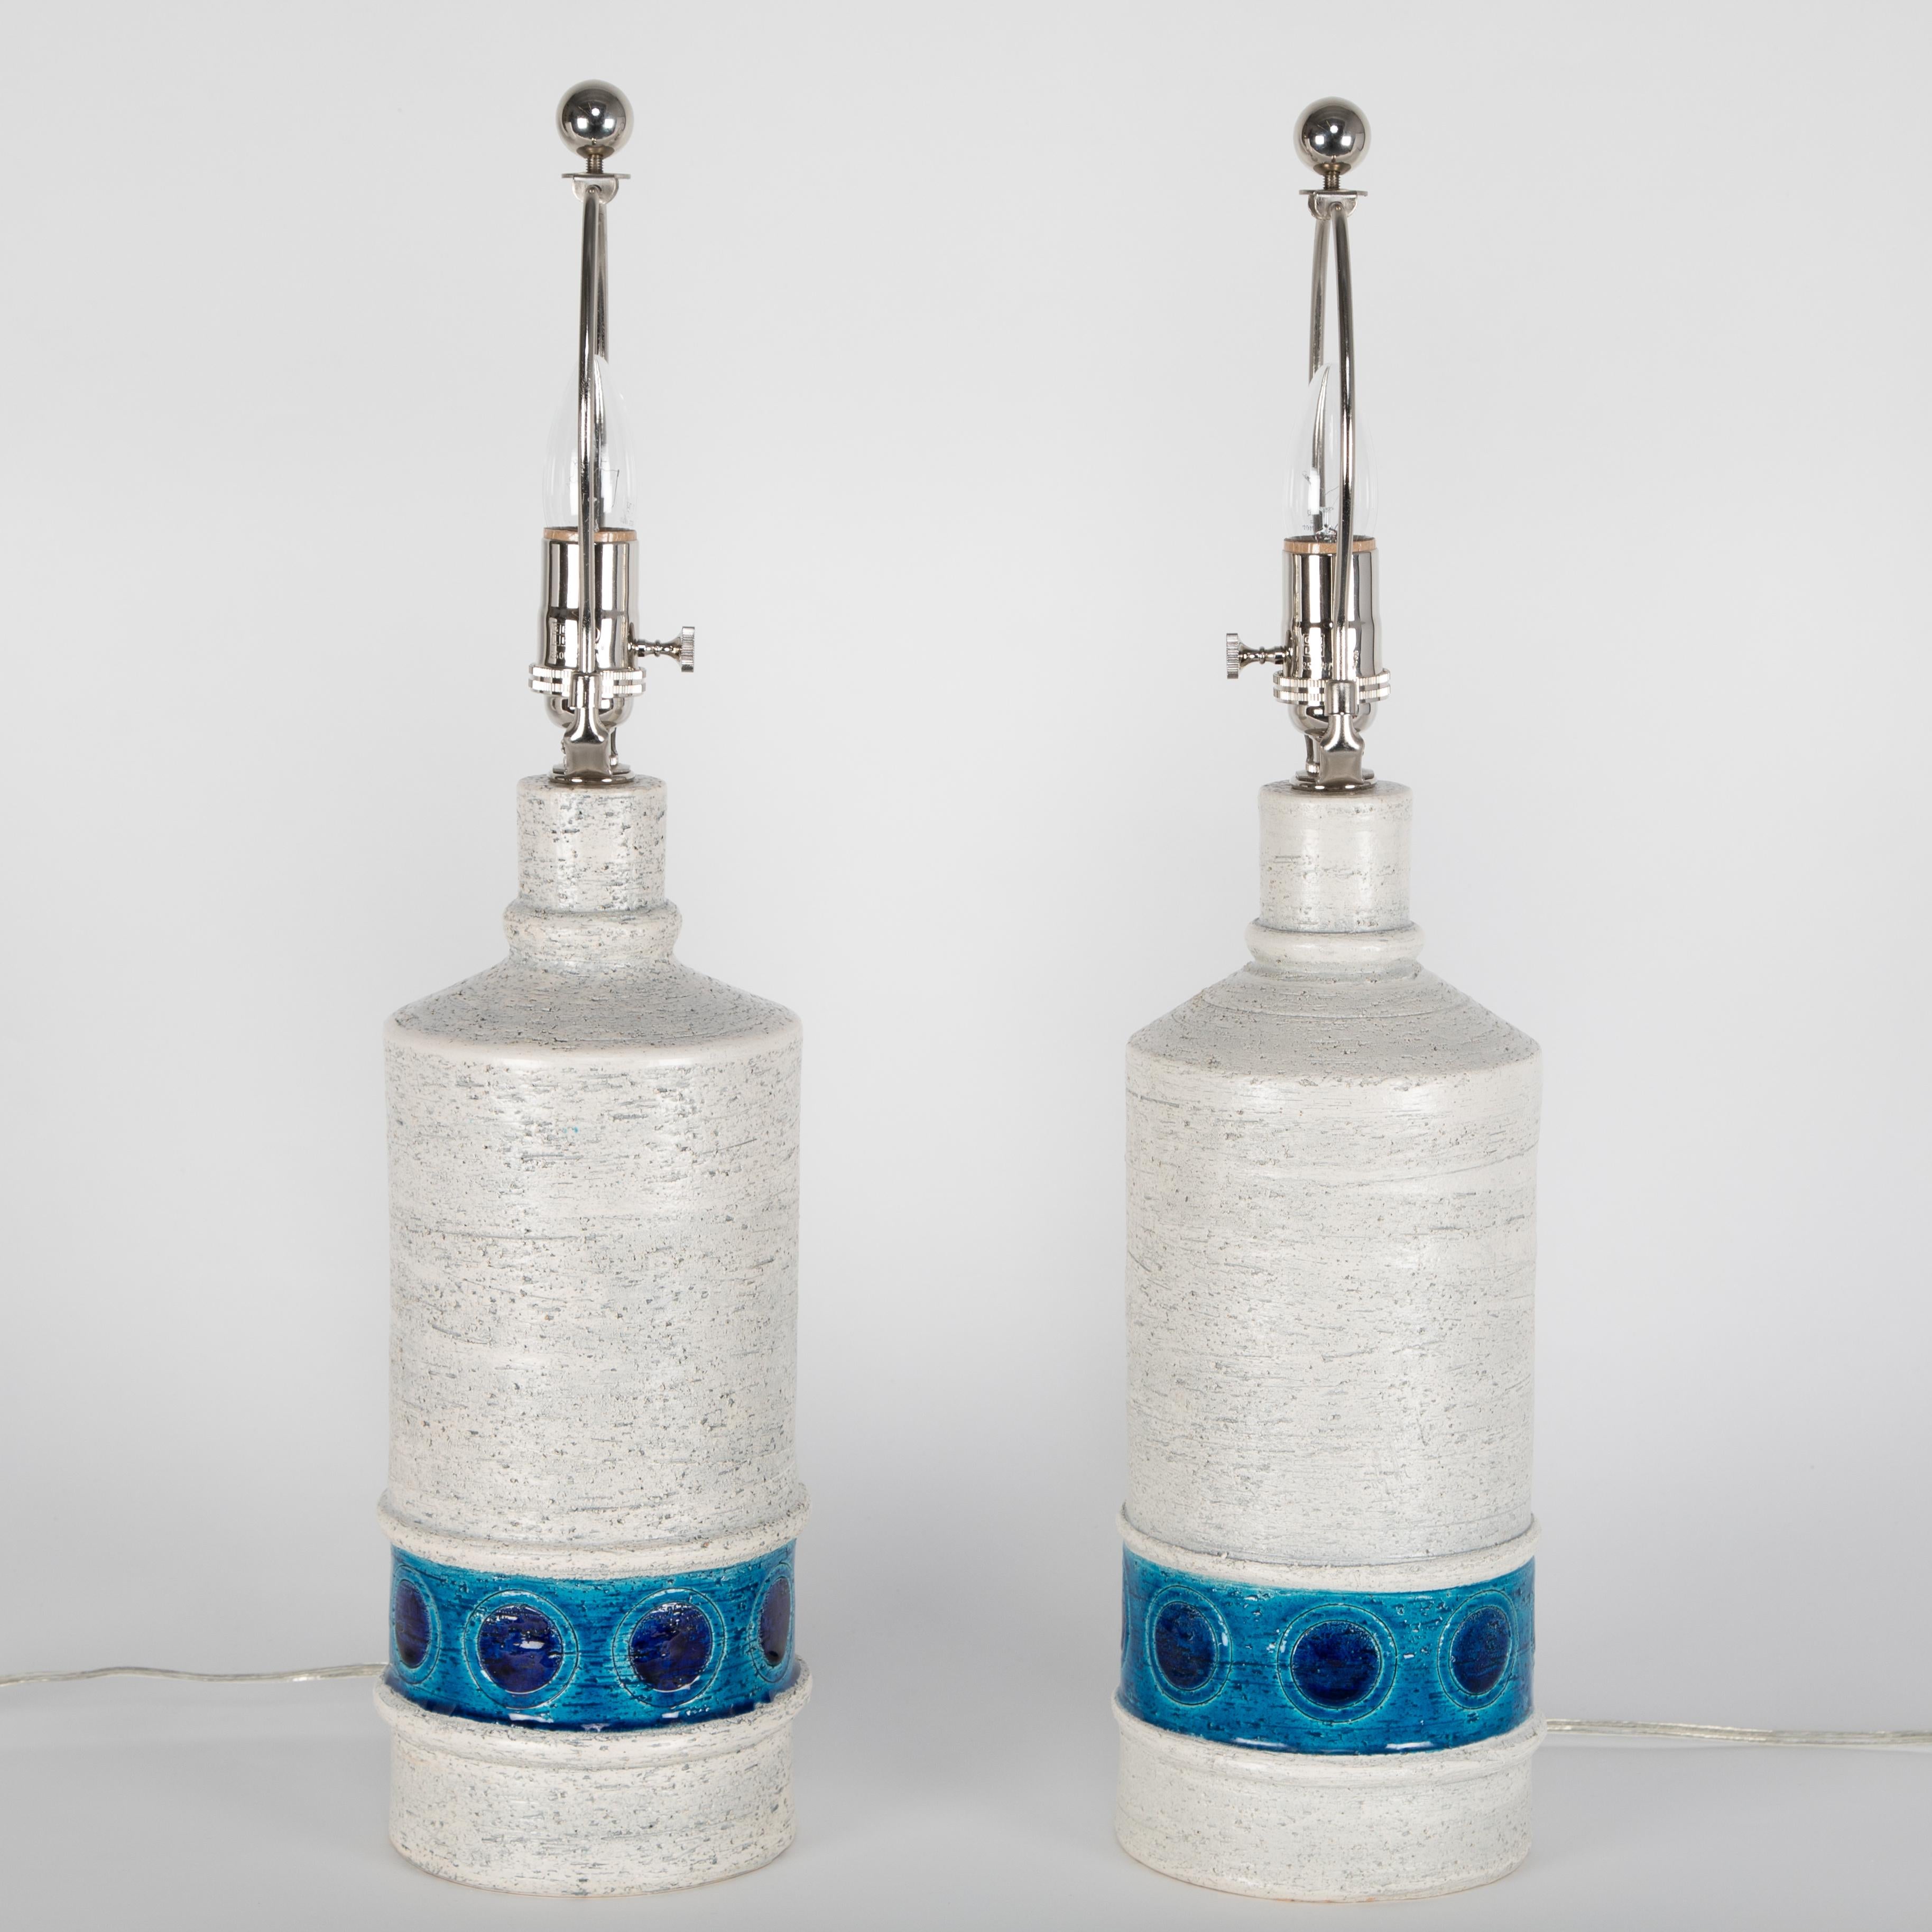 A fine pair of glazed ceramic table lamps in a textured, off-white color with a lower band of light and dark blues highlighting incised circular decorations. Designed by Aldo Londi for the collection 